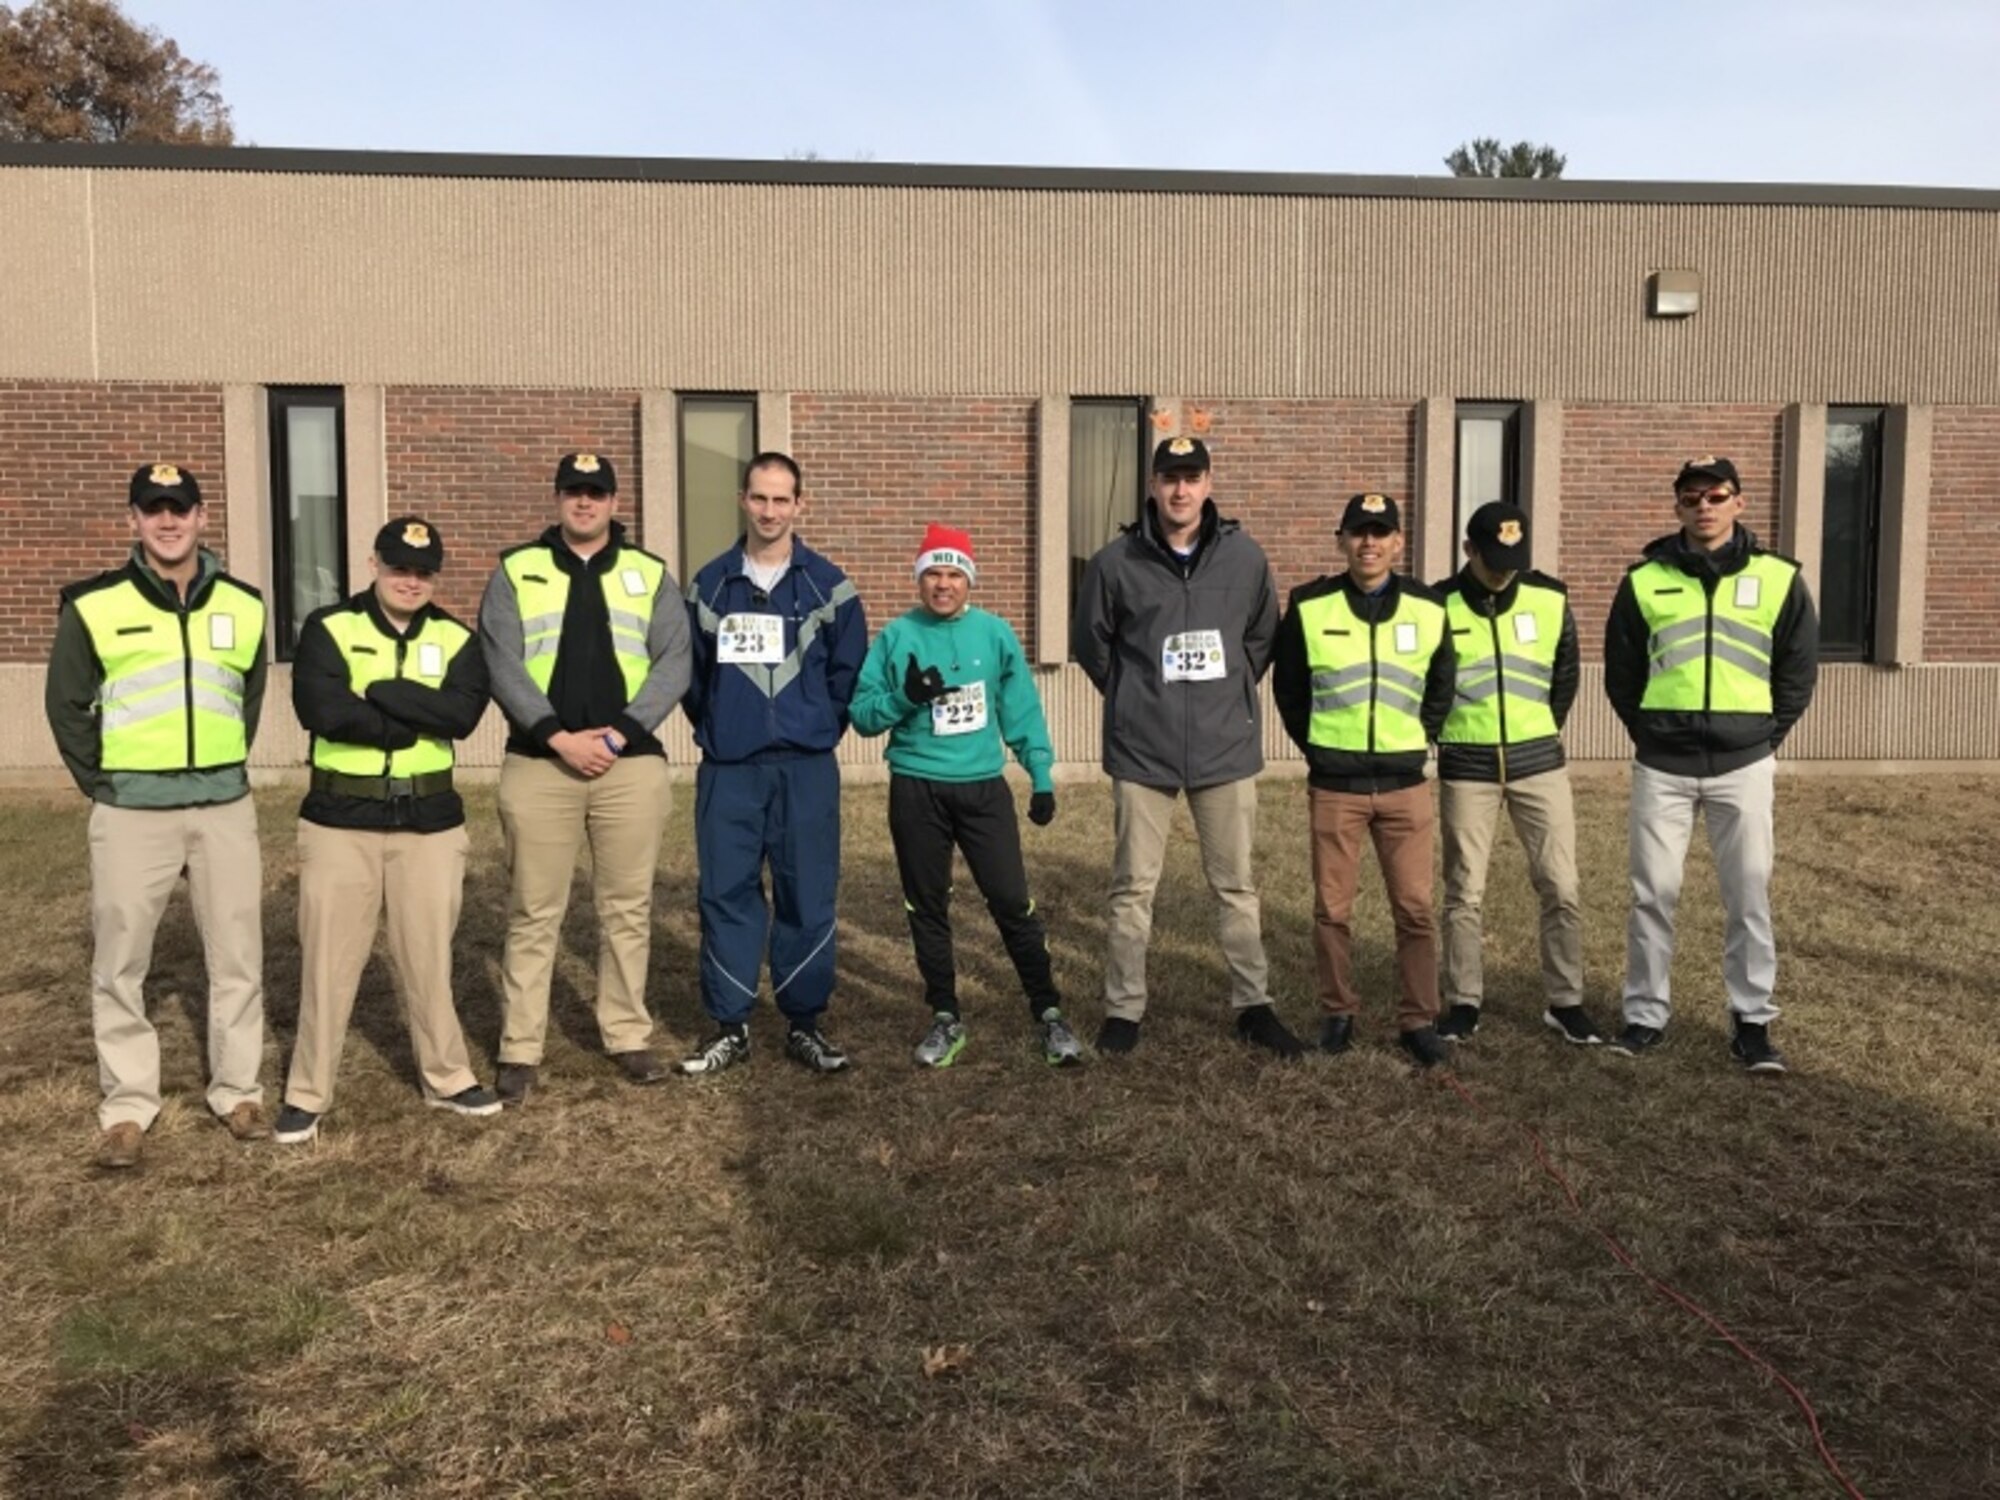 Participants of the 2nd Annual “Fill Our Rucks” 5k run pose for a picture December 2, 2017 at Bradley Air National Guard Base, East Granby, Conn.